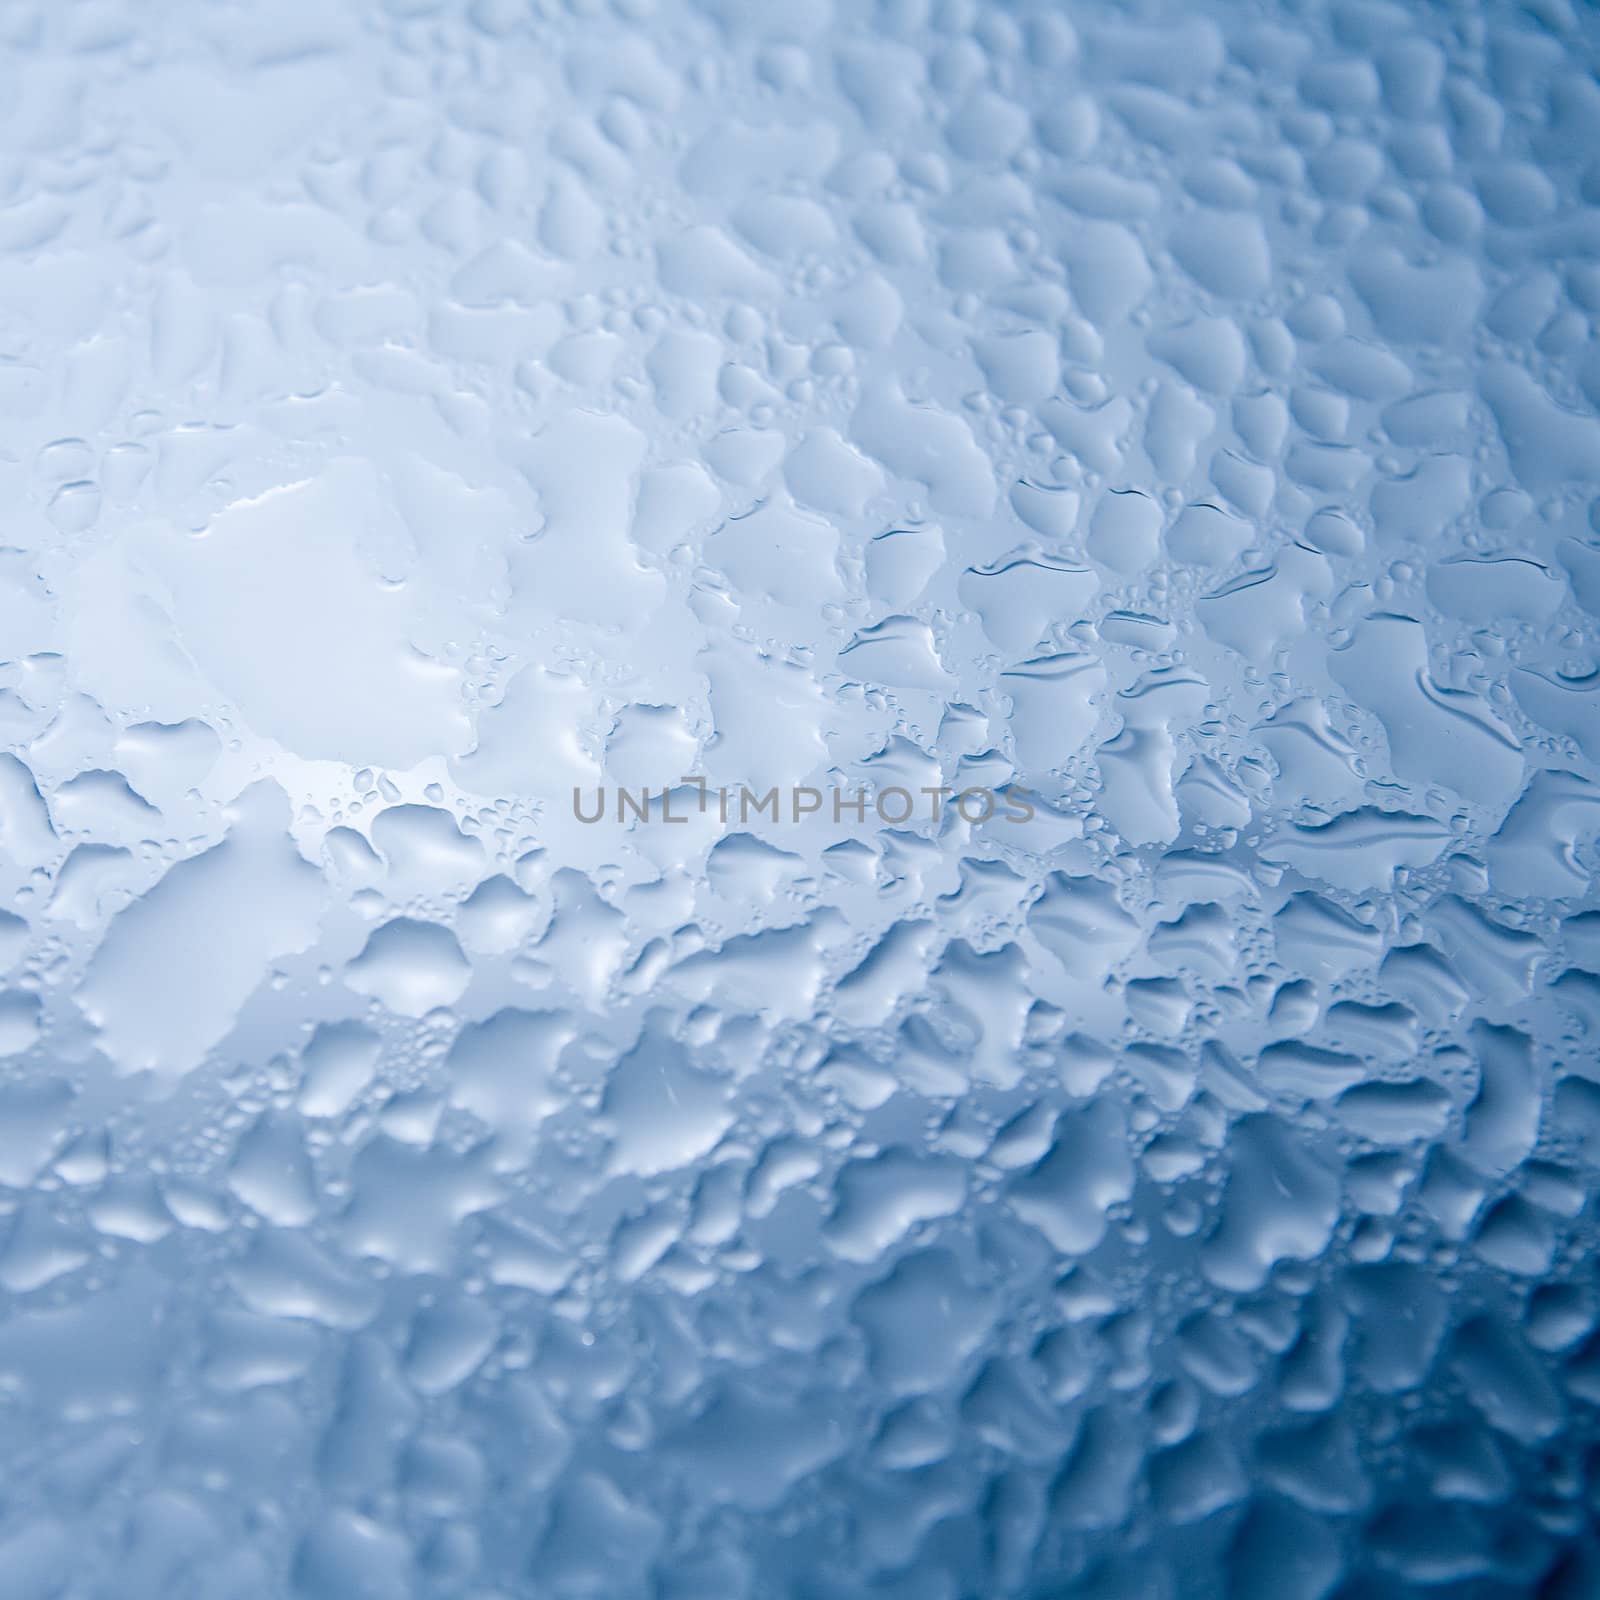 Water surface abstract